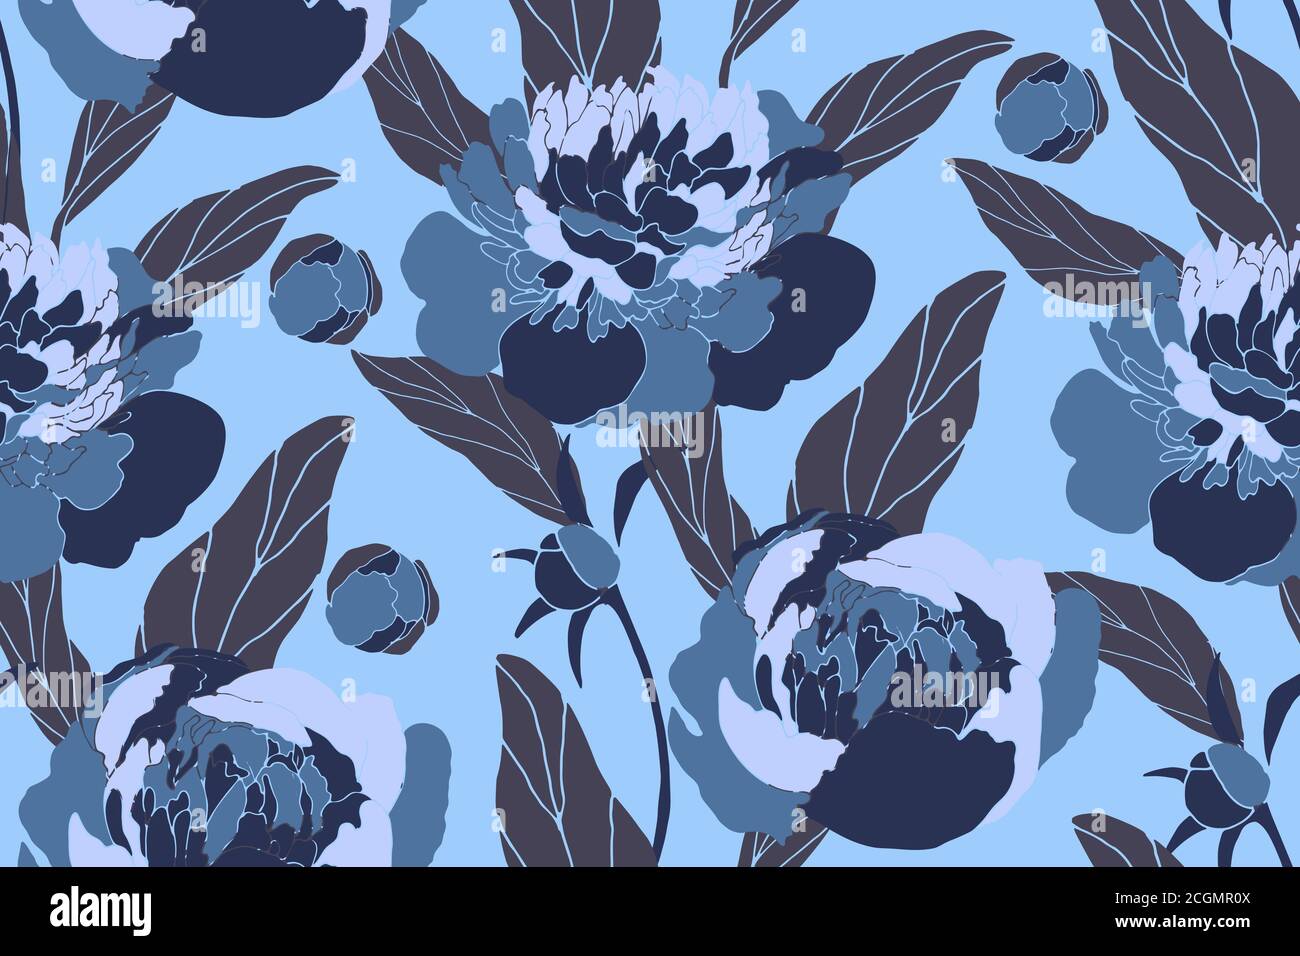 Vector floral seamless pattern. Blue peonies, buds, brown leaves. Stock Vector